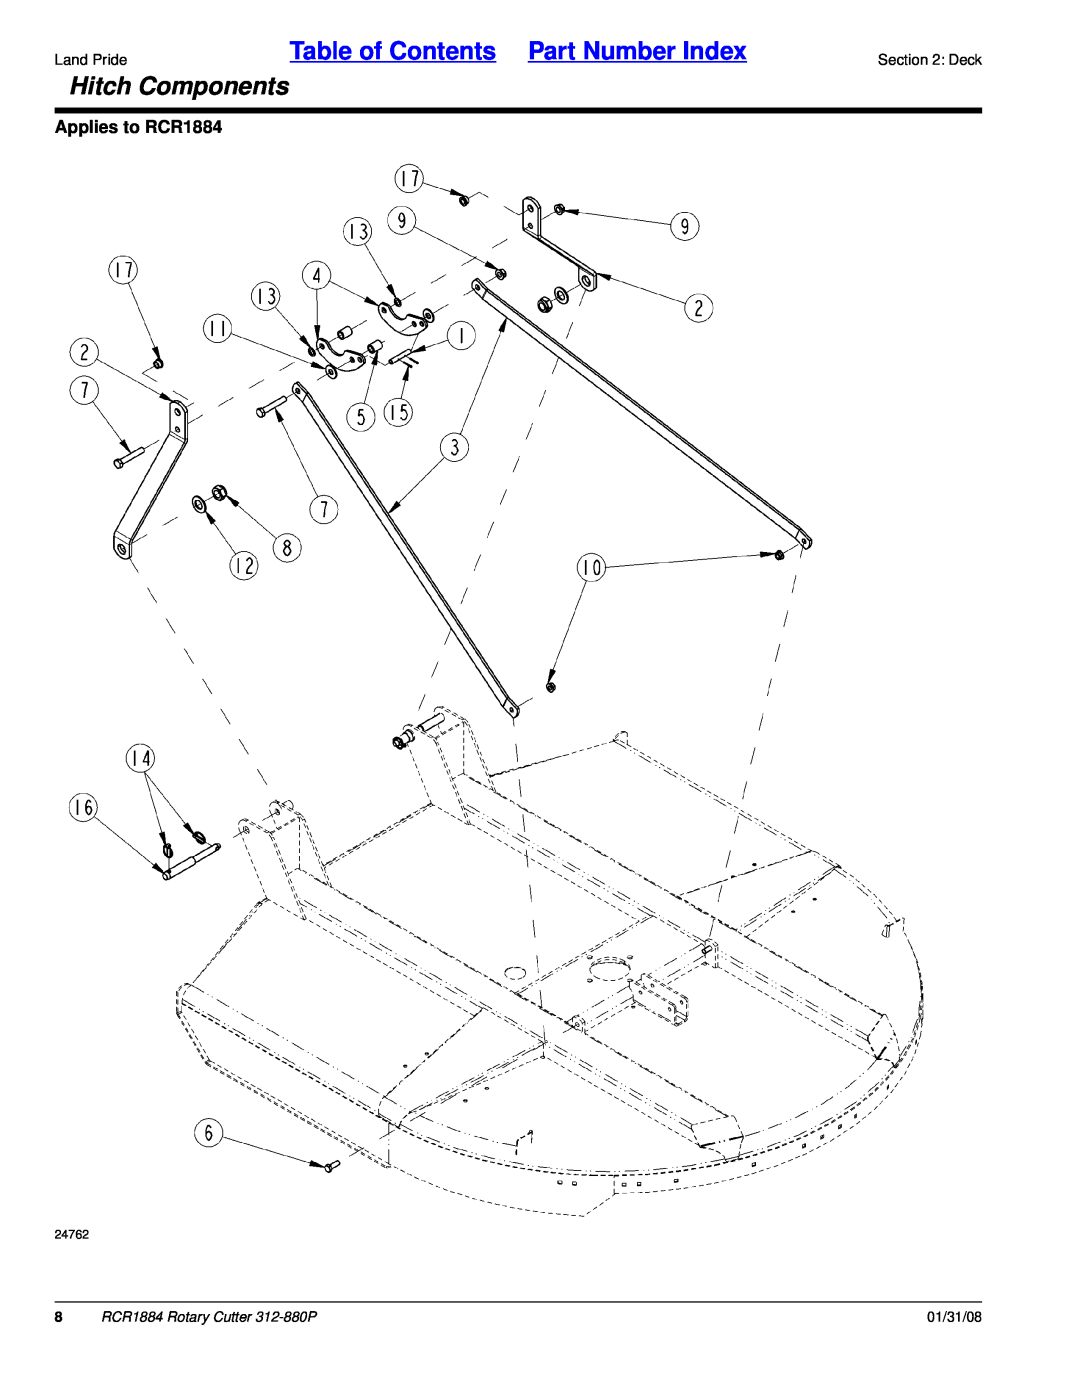 Land Pride Rotary Cutter manual Hitch Components, Table of Contents Part Number Index, Applies to RCR1884, 01/31/08 